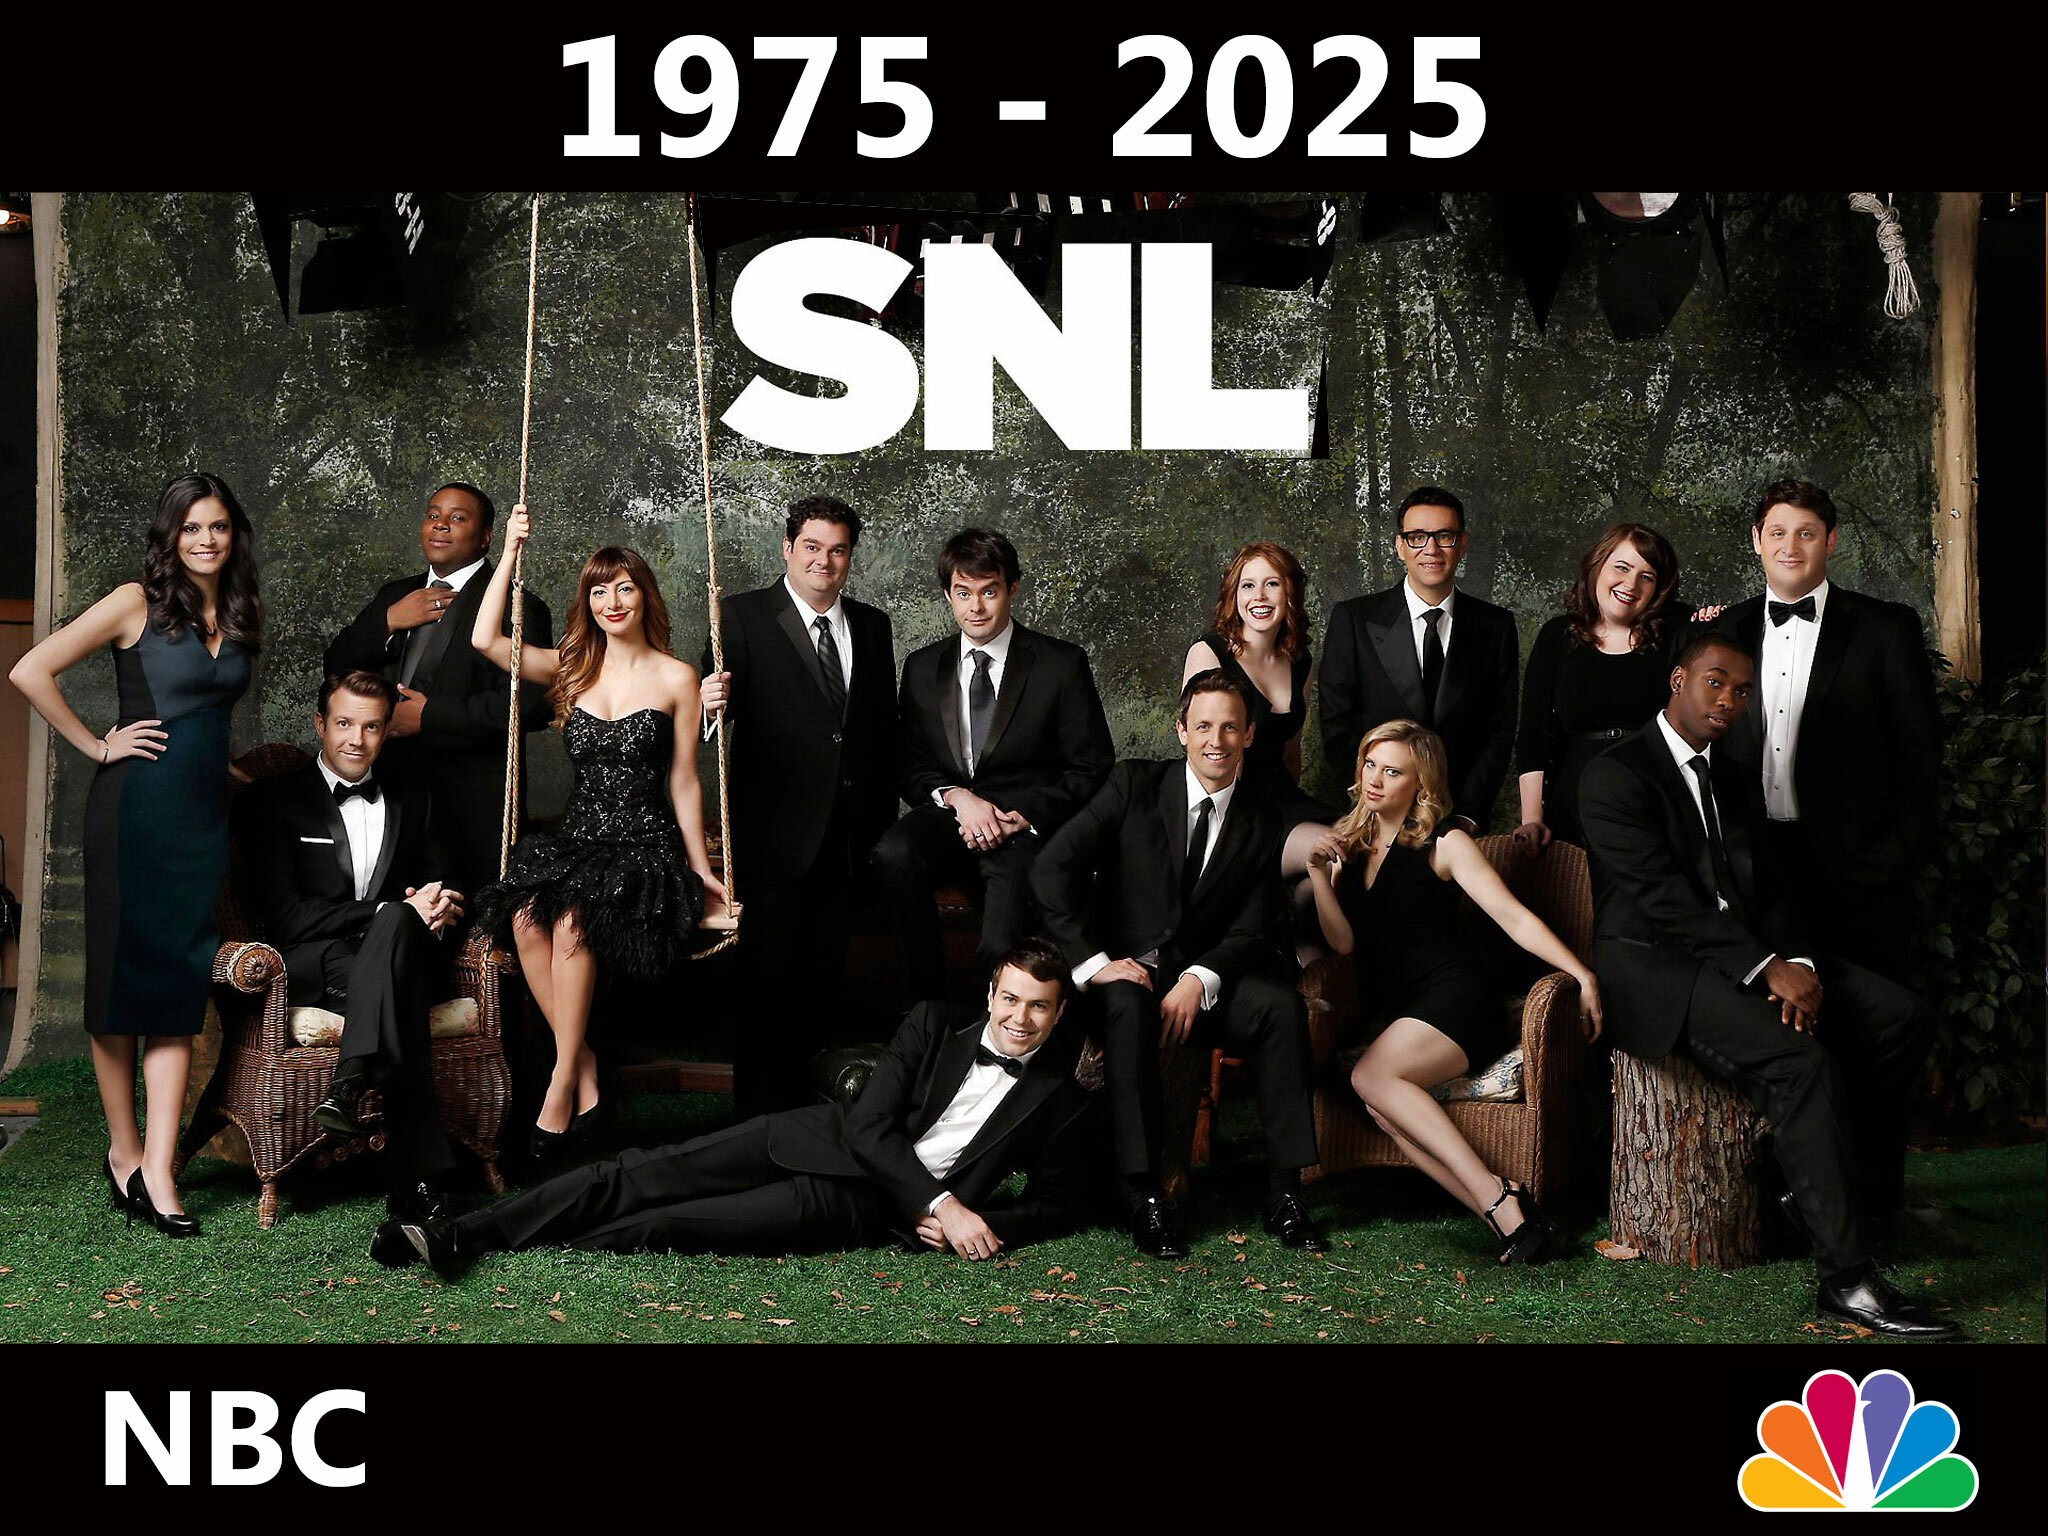 SNL Looks Set to End in 2025